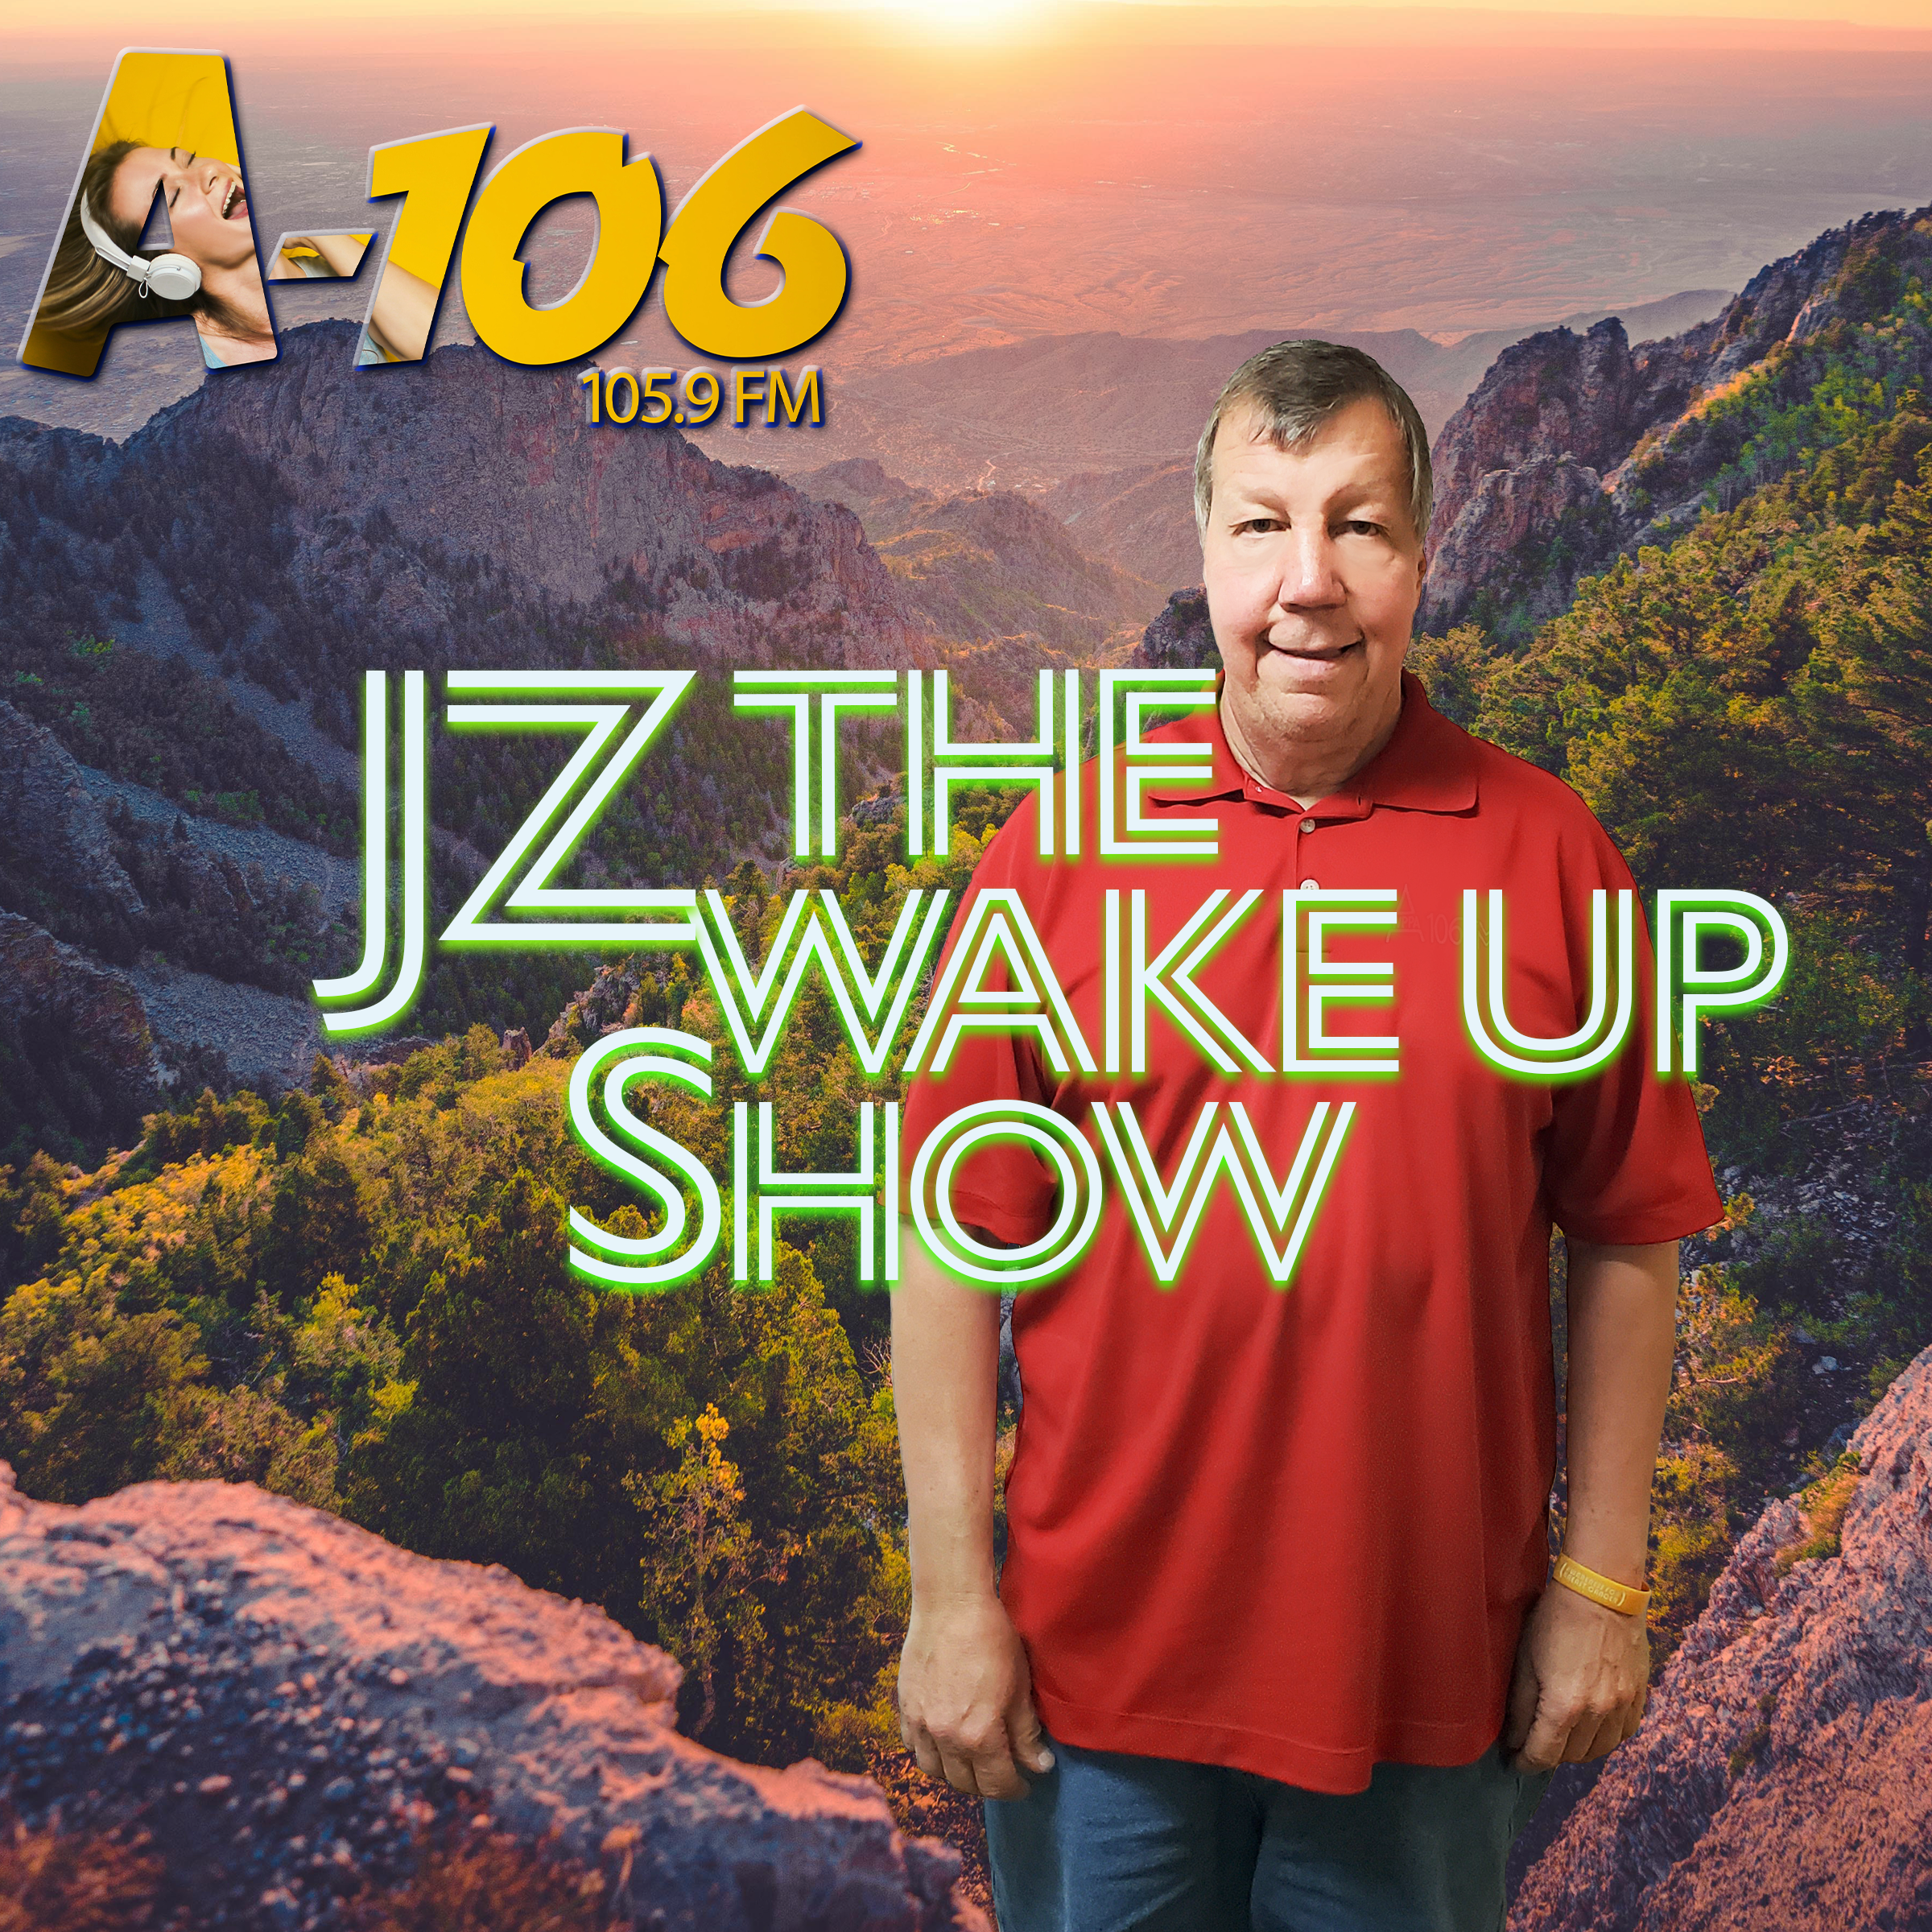 jz-the-wake-up-show-8x8